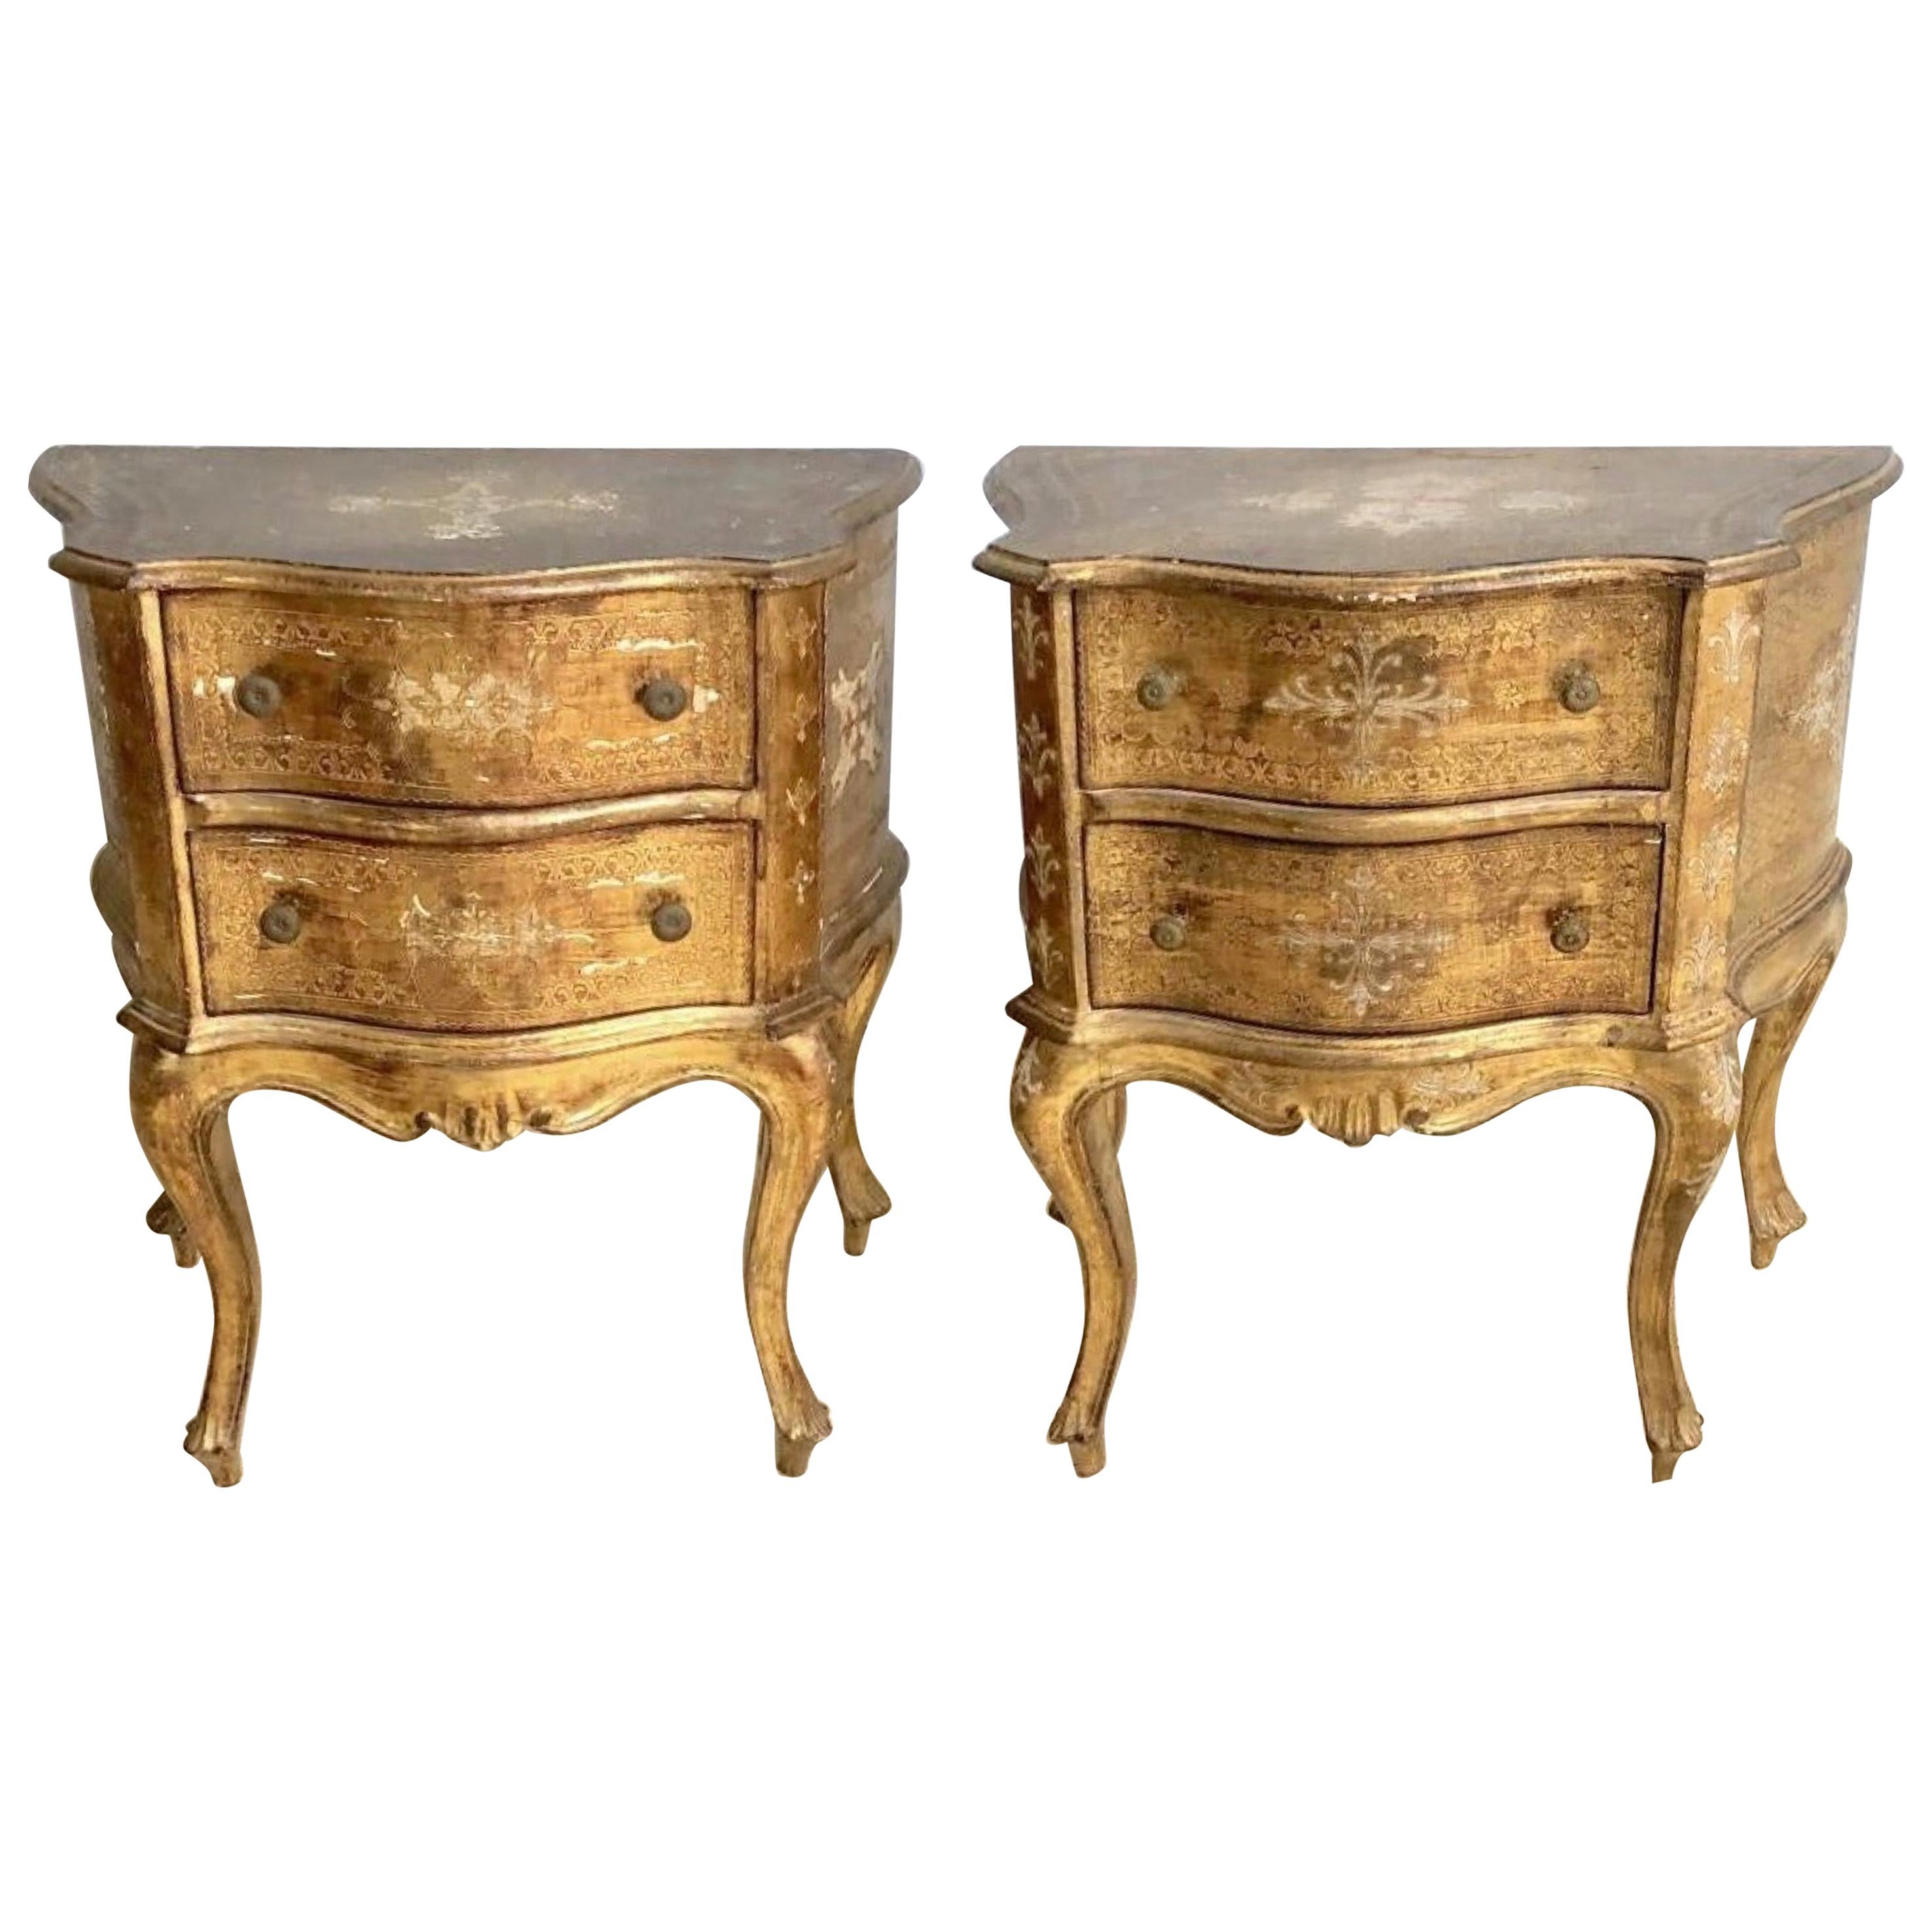 Pair of Venetian Rococo Style Gilt Painted Commodes